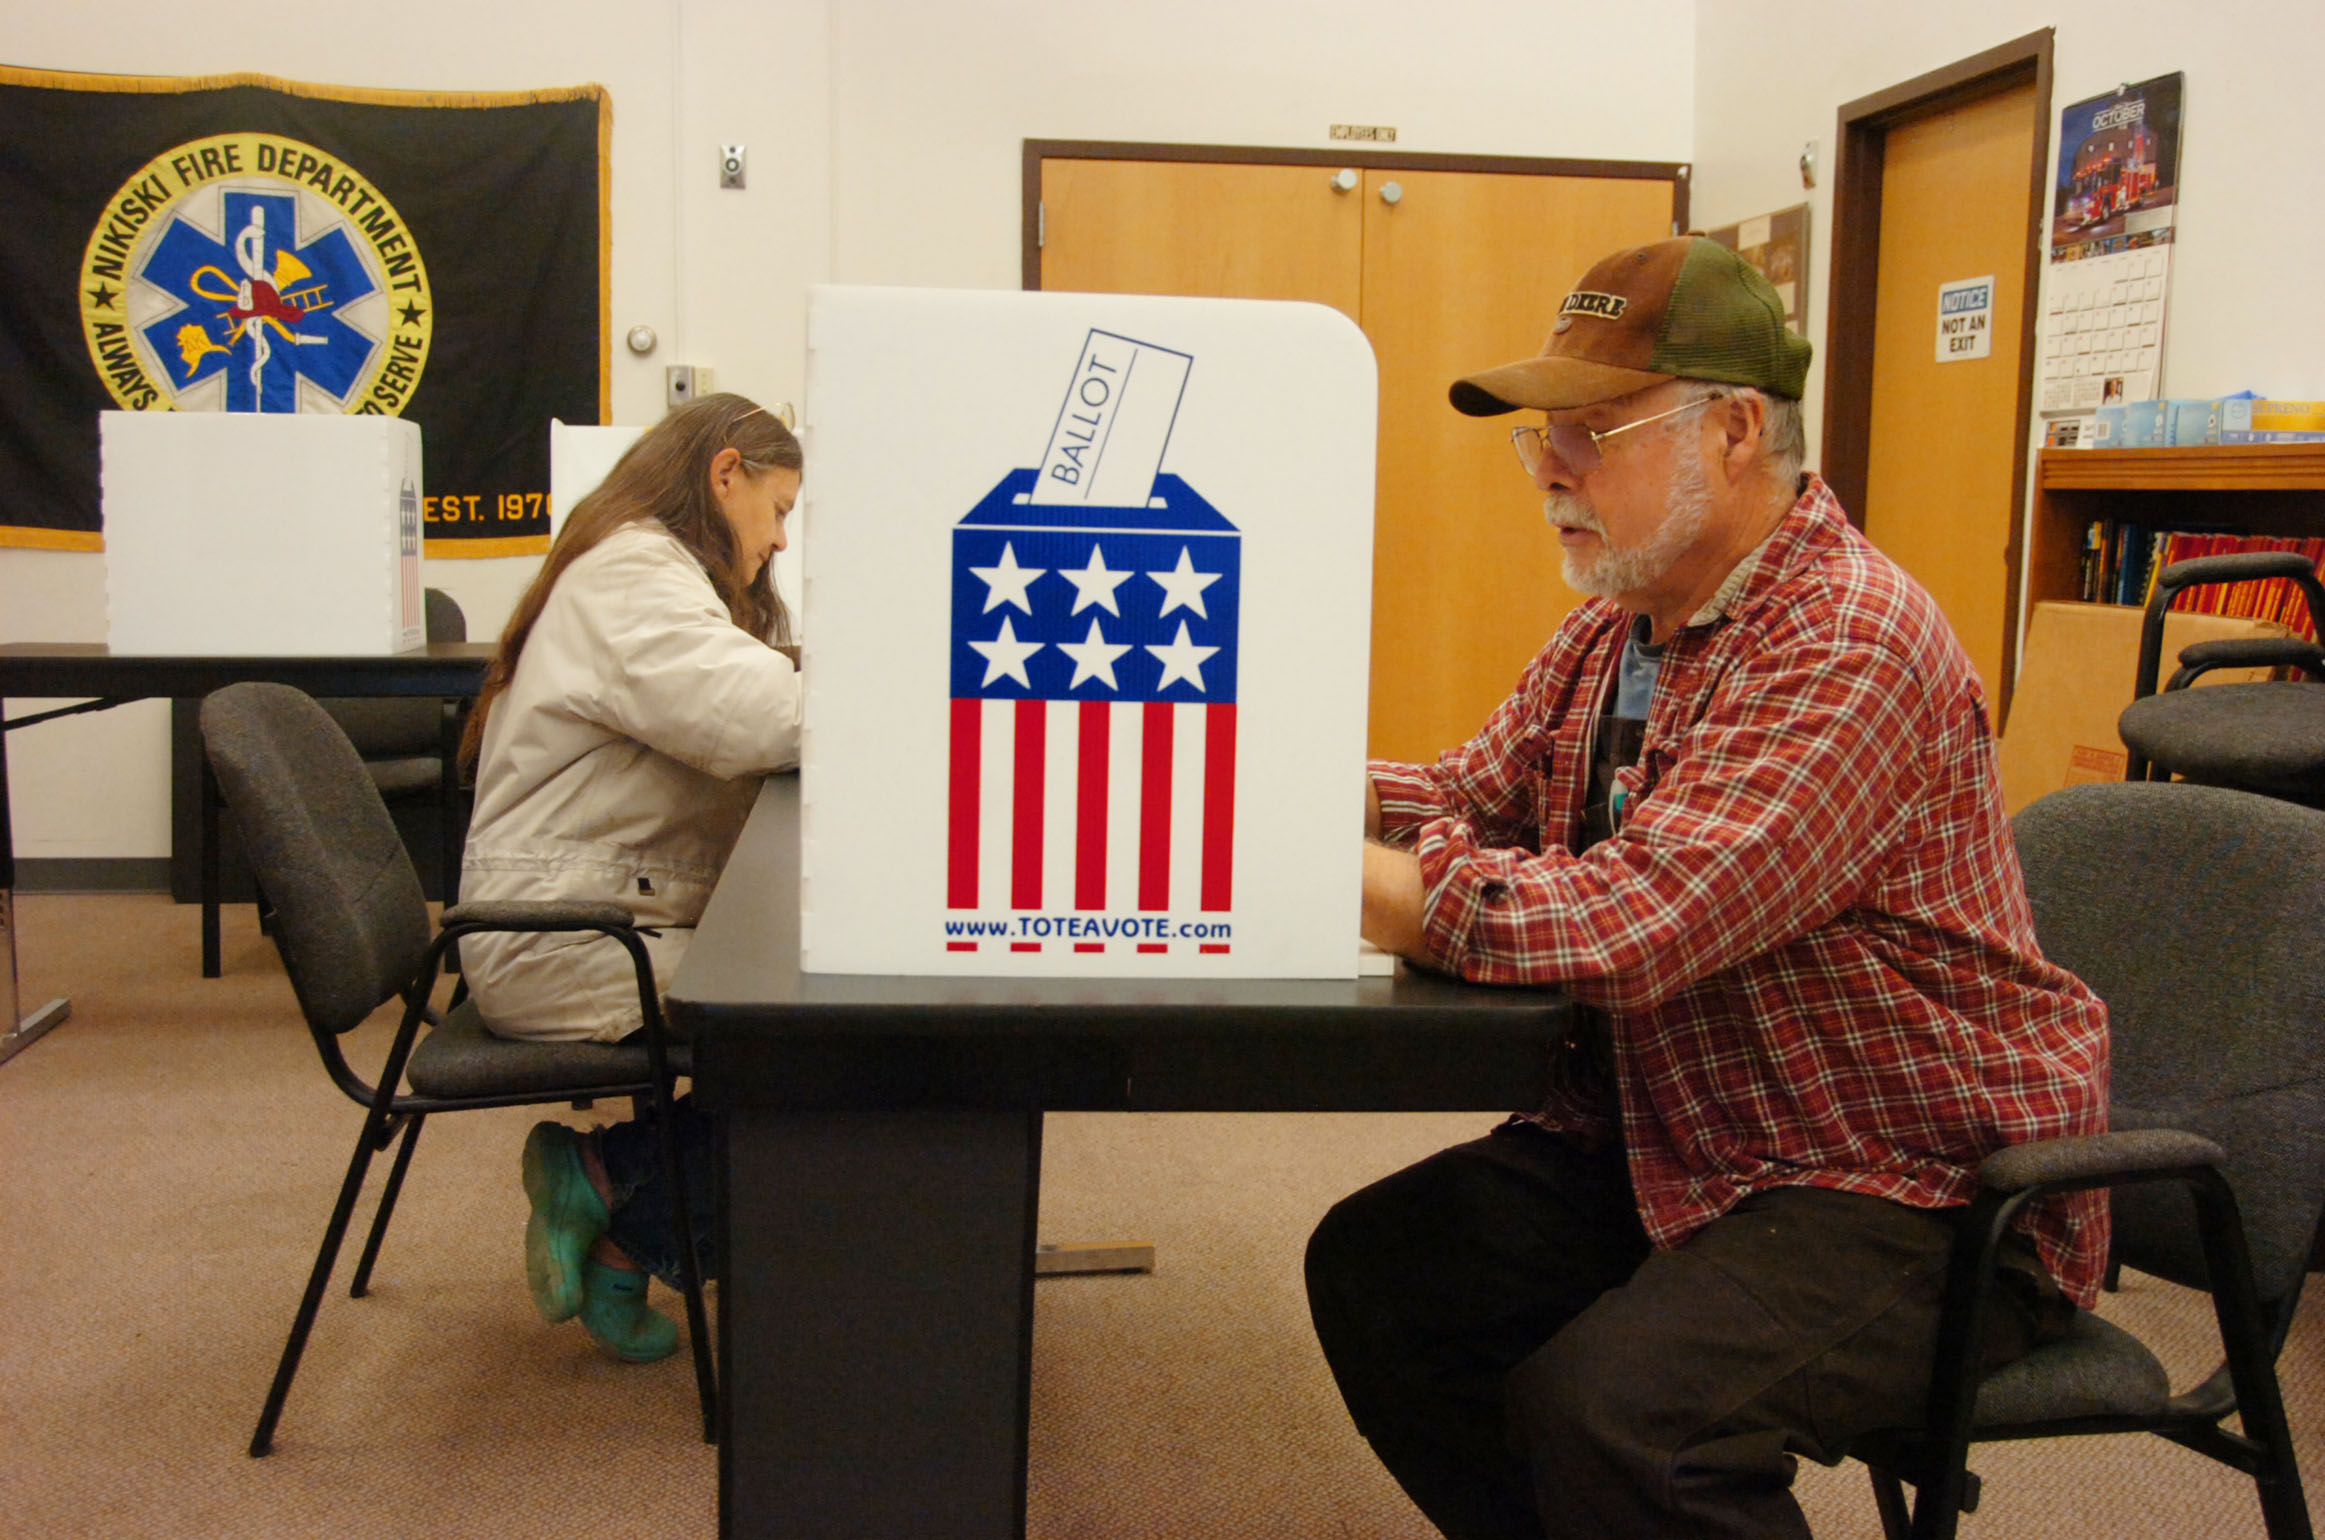 Nikiski residents Lynda Moore, left, and Ewin Frothingham, right, cast their votes during the regular election on Tuesday, Oct. 6, 2015 at the Nikiski Fire Department Station 1 poll location in Nikiski, Alaska.